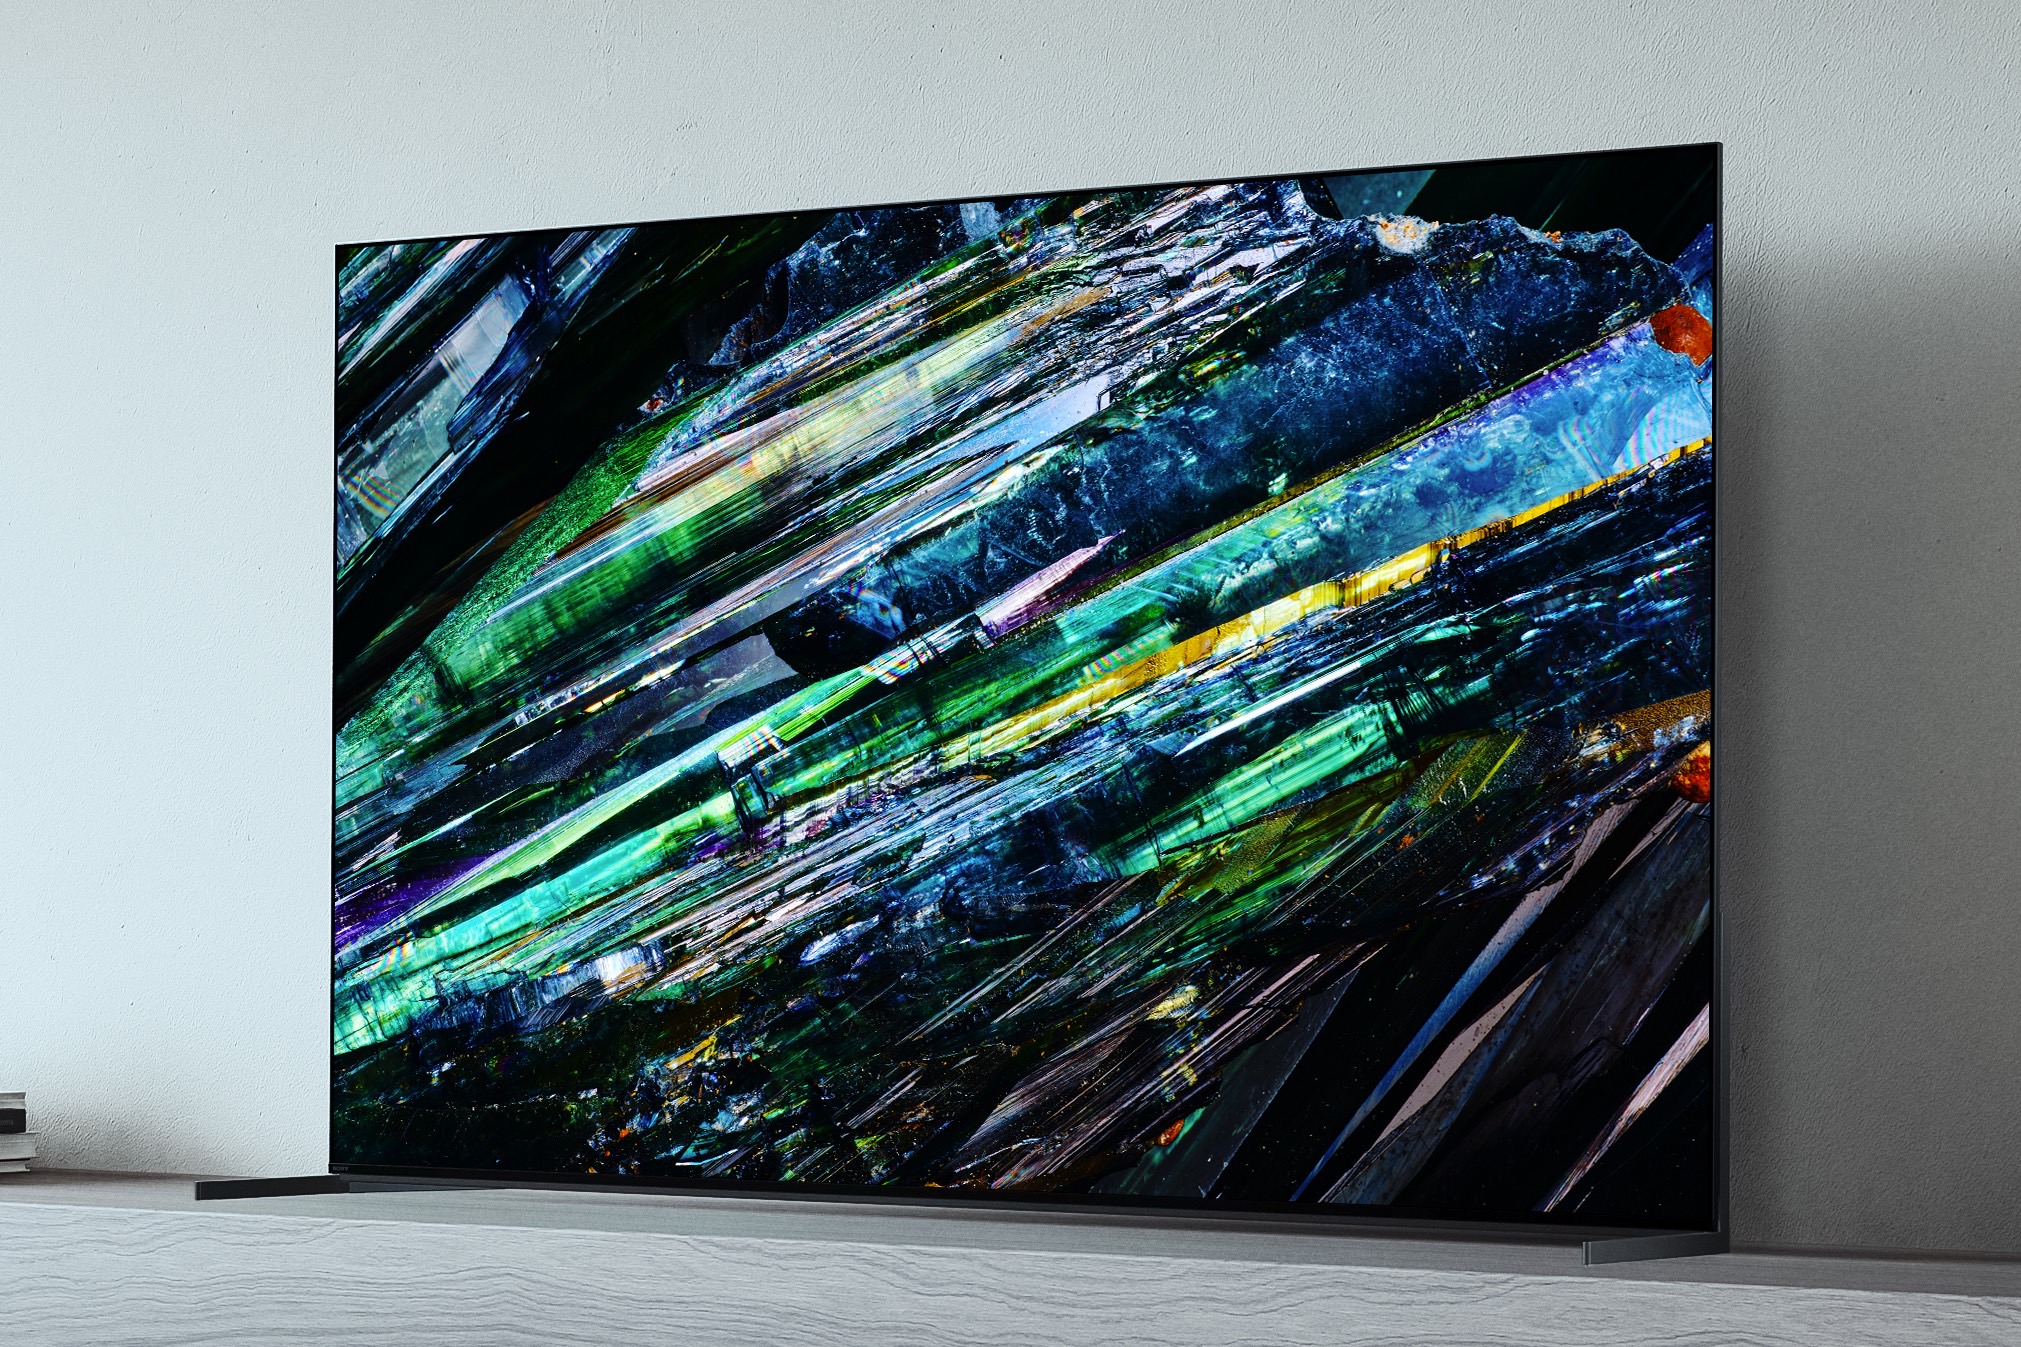 Sony’s 2023 A95L QD-OLED TV up for preorder in August starting at $2,800 - Digital Trends